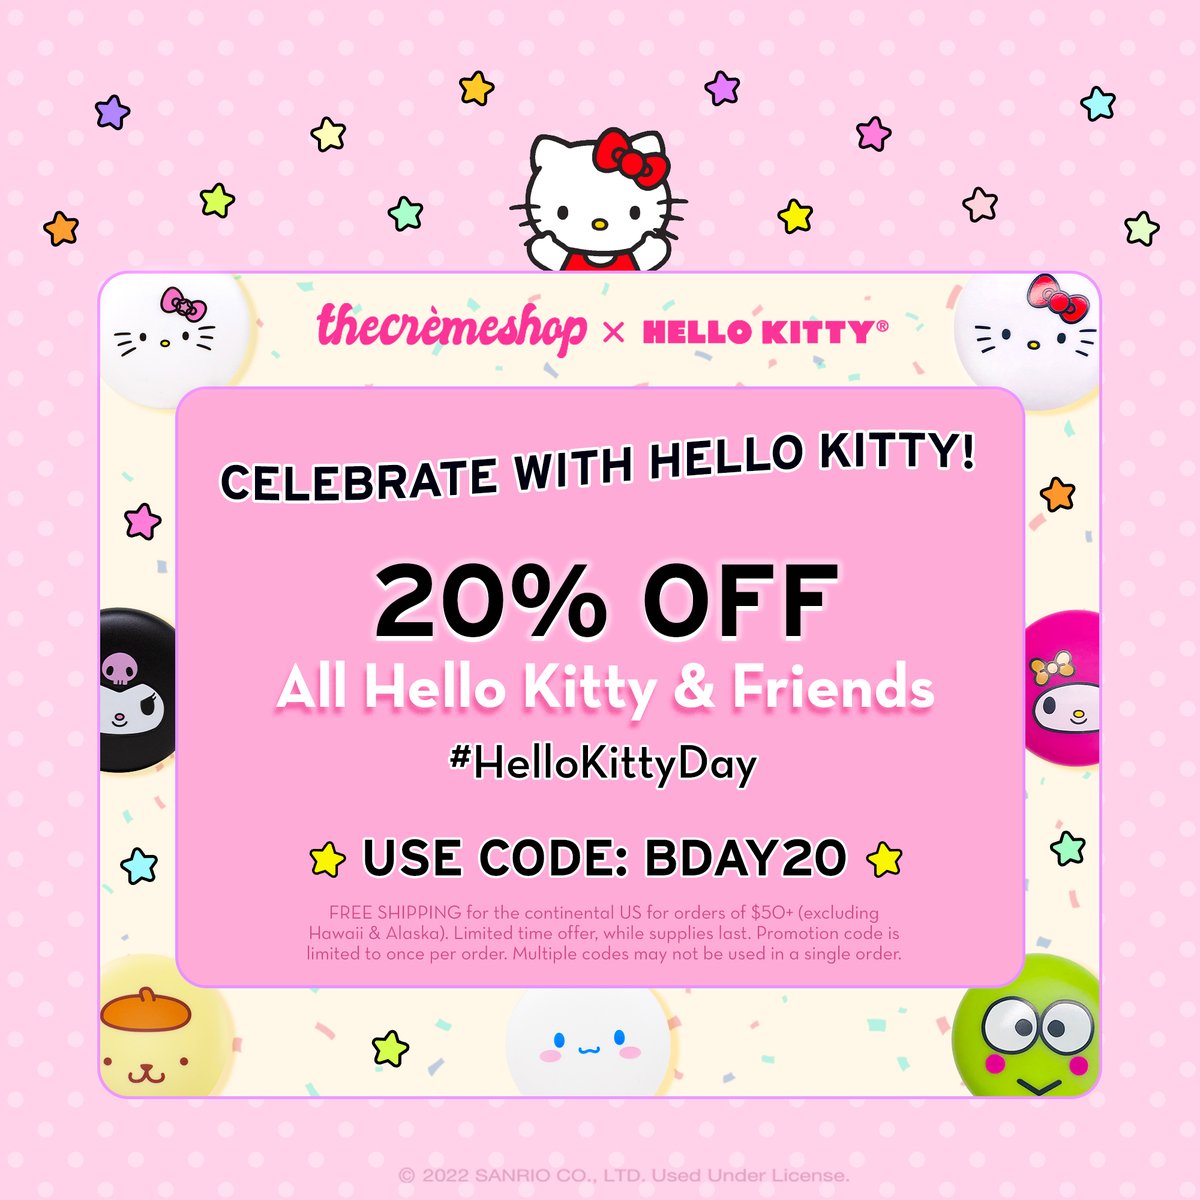 CELEBRATE with @hellokitty 💖🍰 USE CODE: BDAY20 ✨ for 20% OFF all hello kitty & friends! #hellokittyday #hellokitty 🎀 thecremeshop.com 🎀